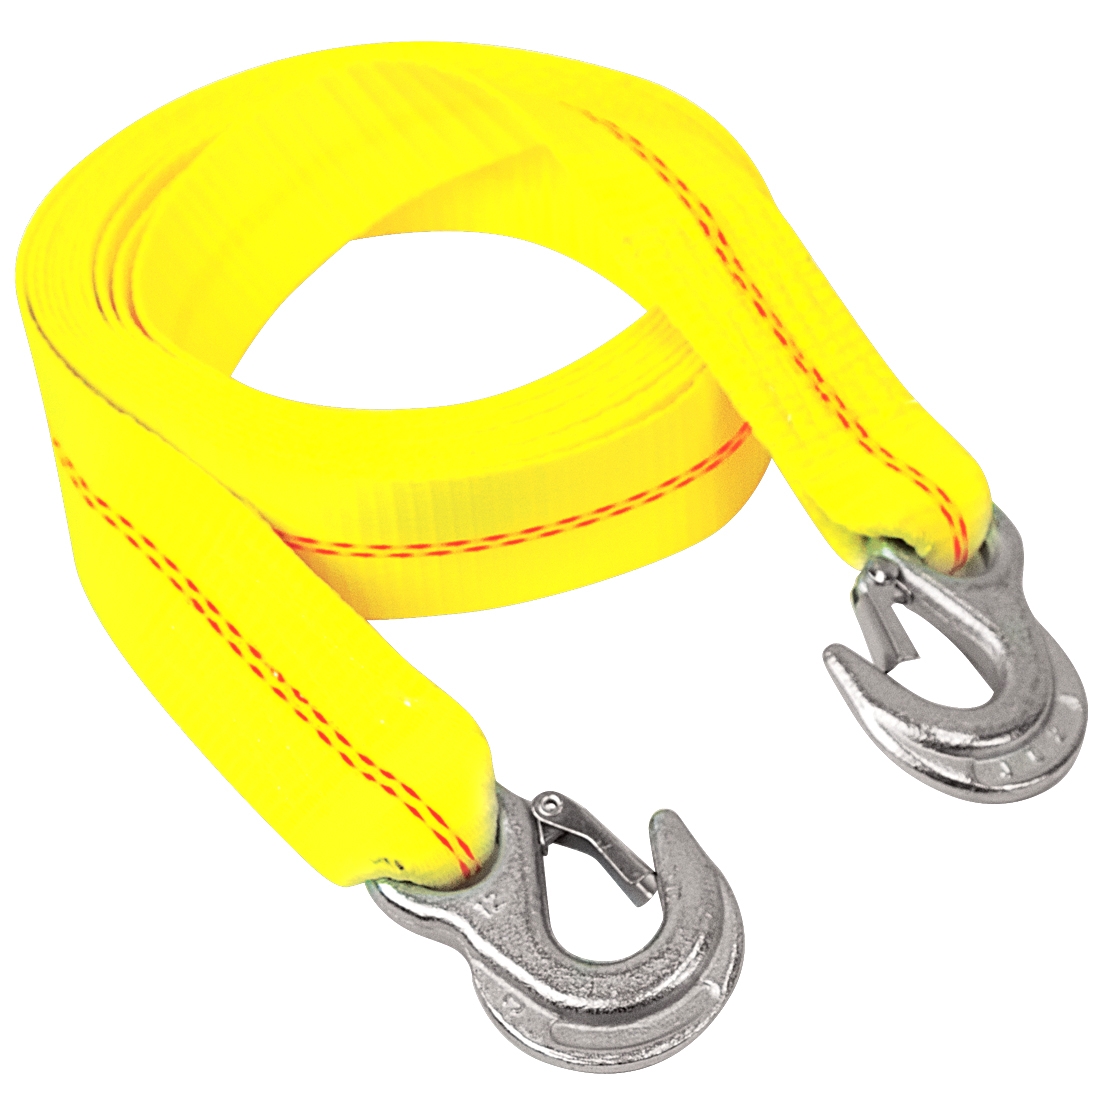 2 x 10' Polyester Tow Strap with Forged Safety Hooks